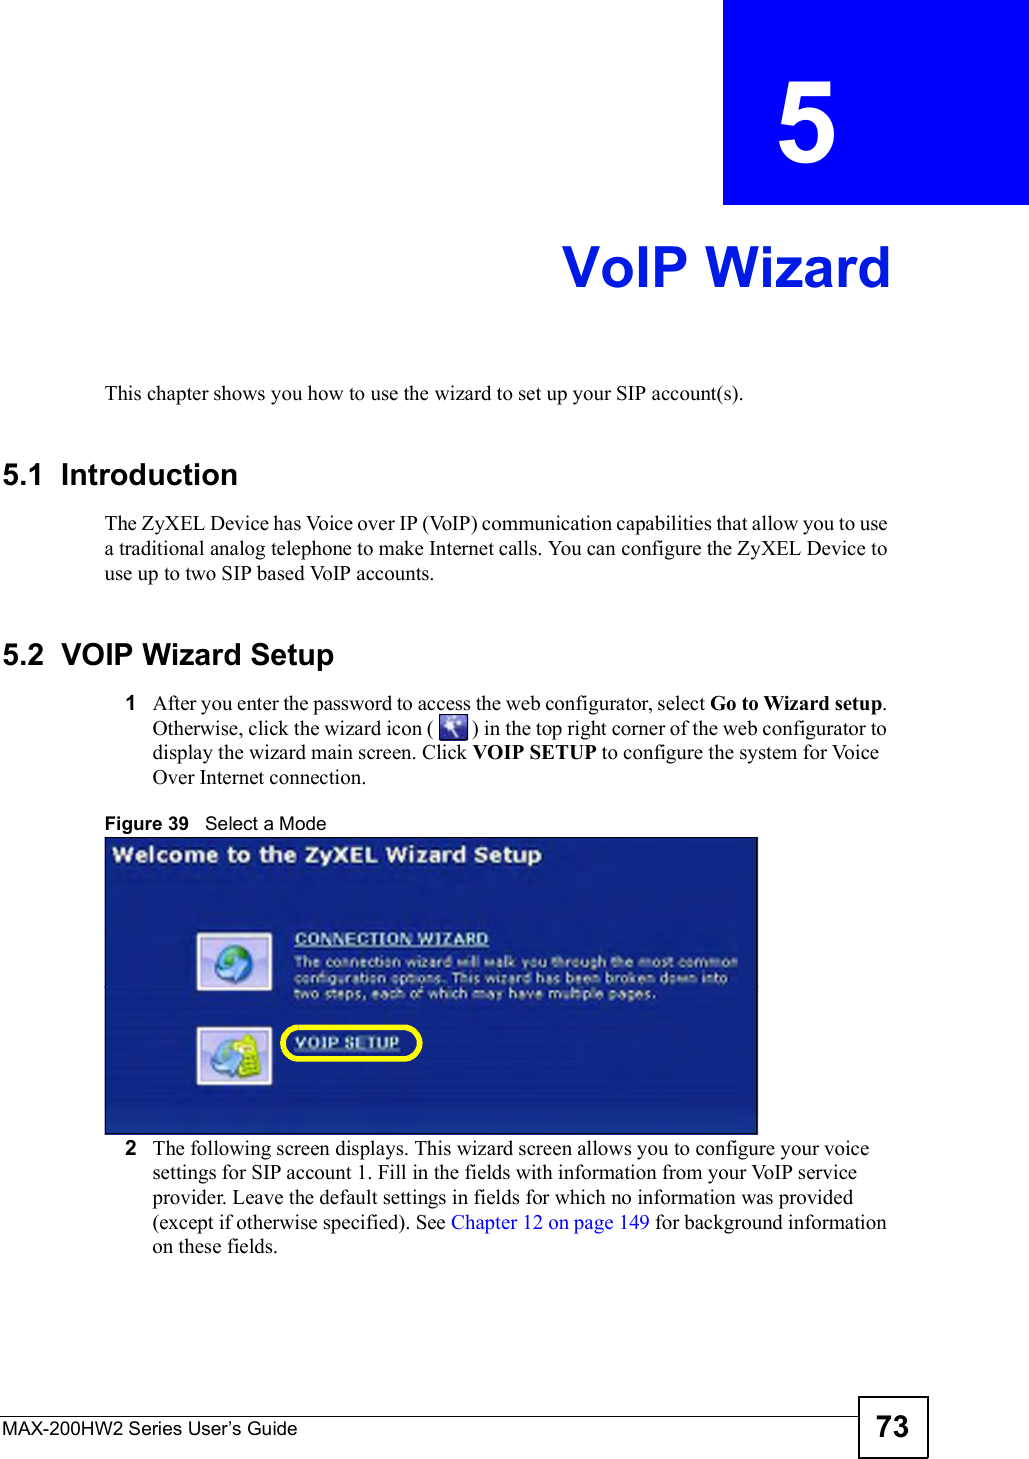 MAX-200HW2 Series User s Guide 73CHAPTER  5 VoIP WizardThis chapter shows you how to use the wizard to set up your SIP account(s).5.1  IntroductionThe ZyXEL Device has Voice over IP (VoIP) communication capabilities that allow you to use a traditional analog telephone to make Internet calls. You can configure the ZyXEL Device to use up to two SIP based VoIP accounts.5.2  VOIP Wizard Setup1After you enter the password to access the web configurator, select Go to Wizard setup.Otherwise, click the wizard icon (  ) in the top right corner of the web configuratorto display the wizard main screen. Click VOIP SETUP to configure the system for Voice Over Internet connection.Figure 39   Select a Mode2The following screen displays. This wizard screen allows you to configure your voice settings for SIP account 1. Fill in the fields with information from your VoIP service provider. Leave the default settings in fields for which no information was provided (except if otherwise specified). See Chapter 12 on page 149 for background information on these fields.